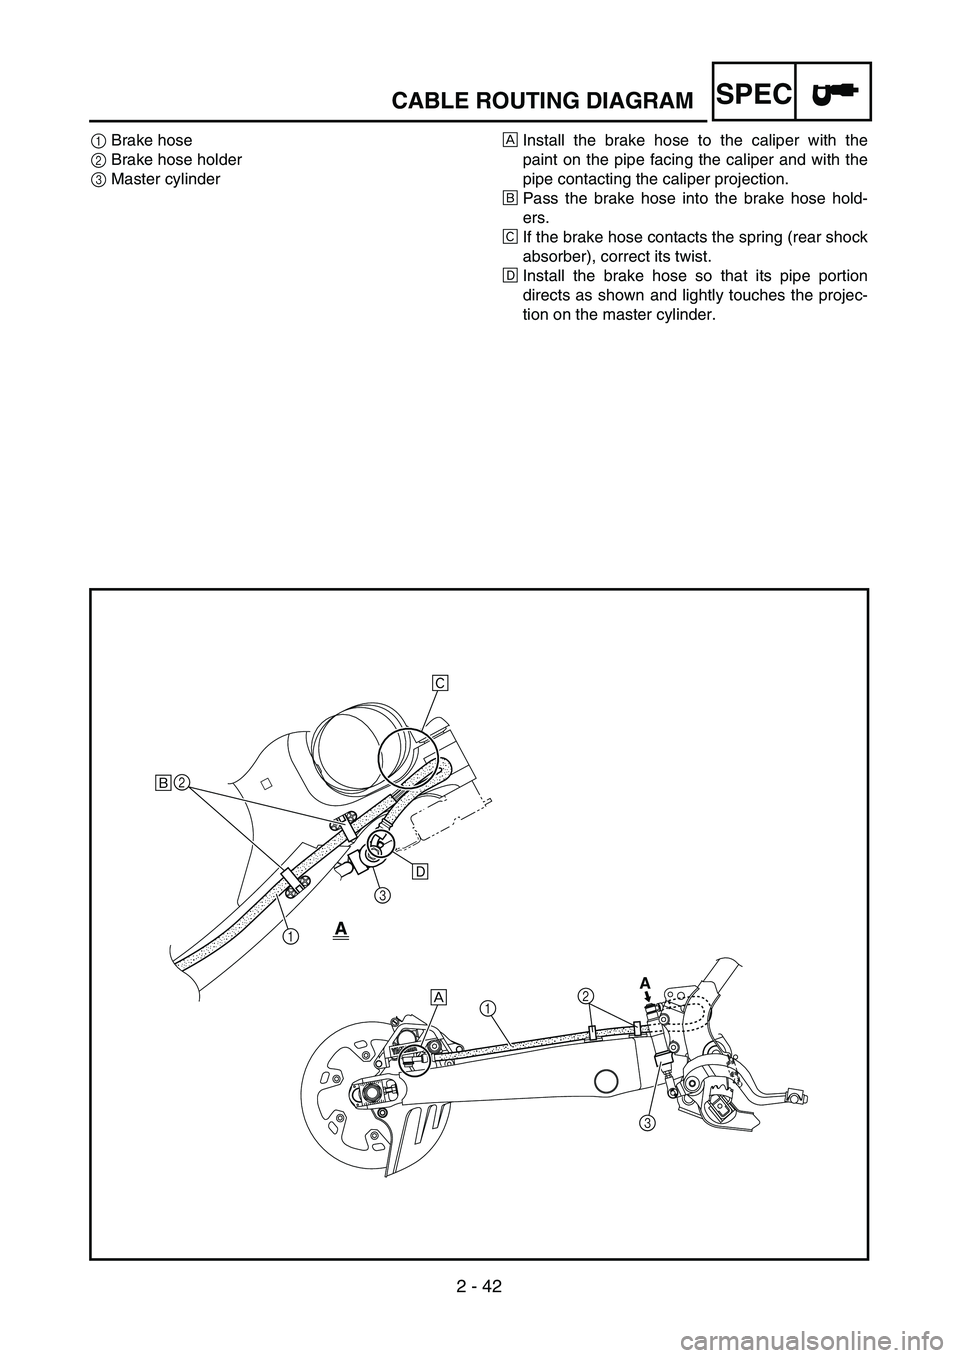 YAMAHA WR 426F 2002  Manuale de Empleo (in Spanish) 2 - 42
SPECCABLE ROUTING DIAGRAM
1Brake hose
2Brake hose holder
3Master cylinderÅInstall the brake hose to the caliper with the
paint on the pipe facing the caliper and with the
pipe contacting the c